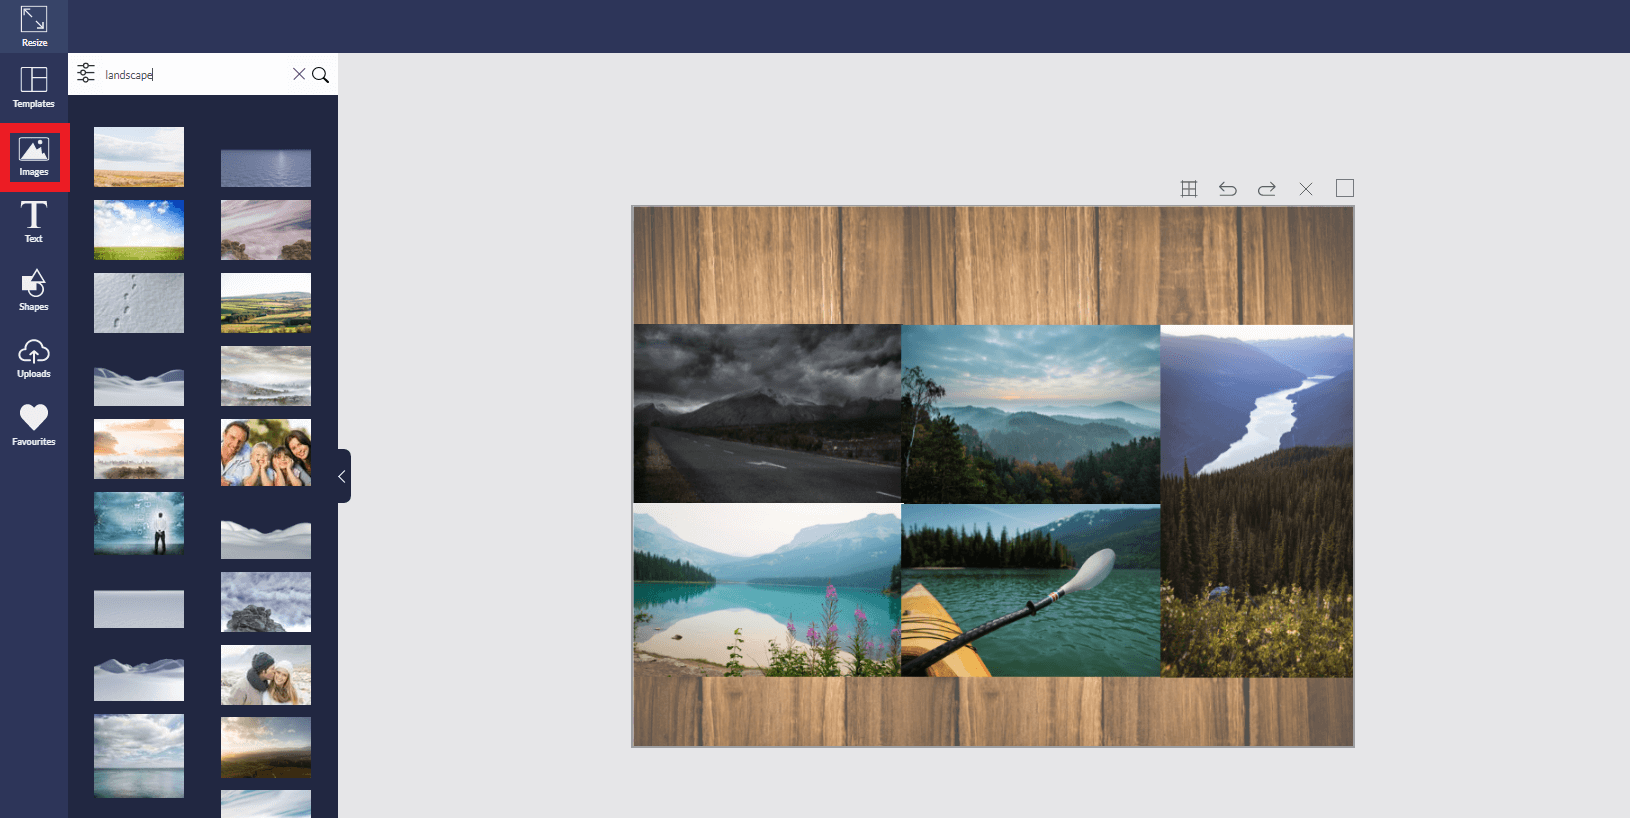 Design Wizard editor page - How to upload images for your vision board using Design Wizard - Image